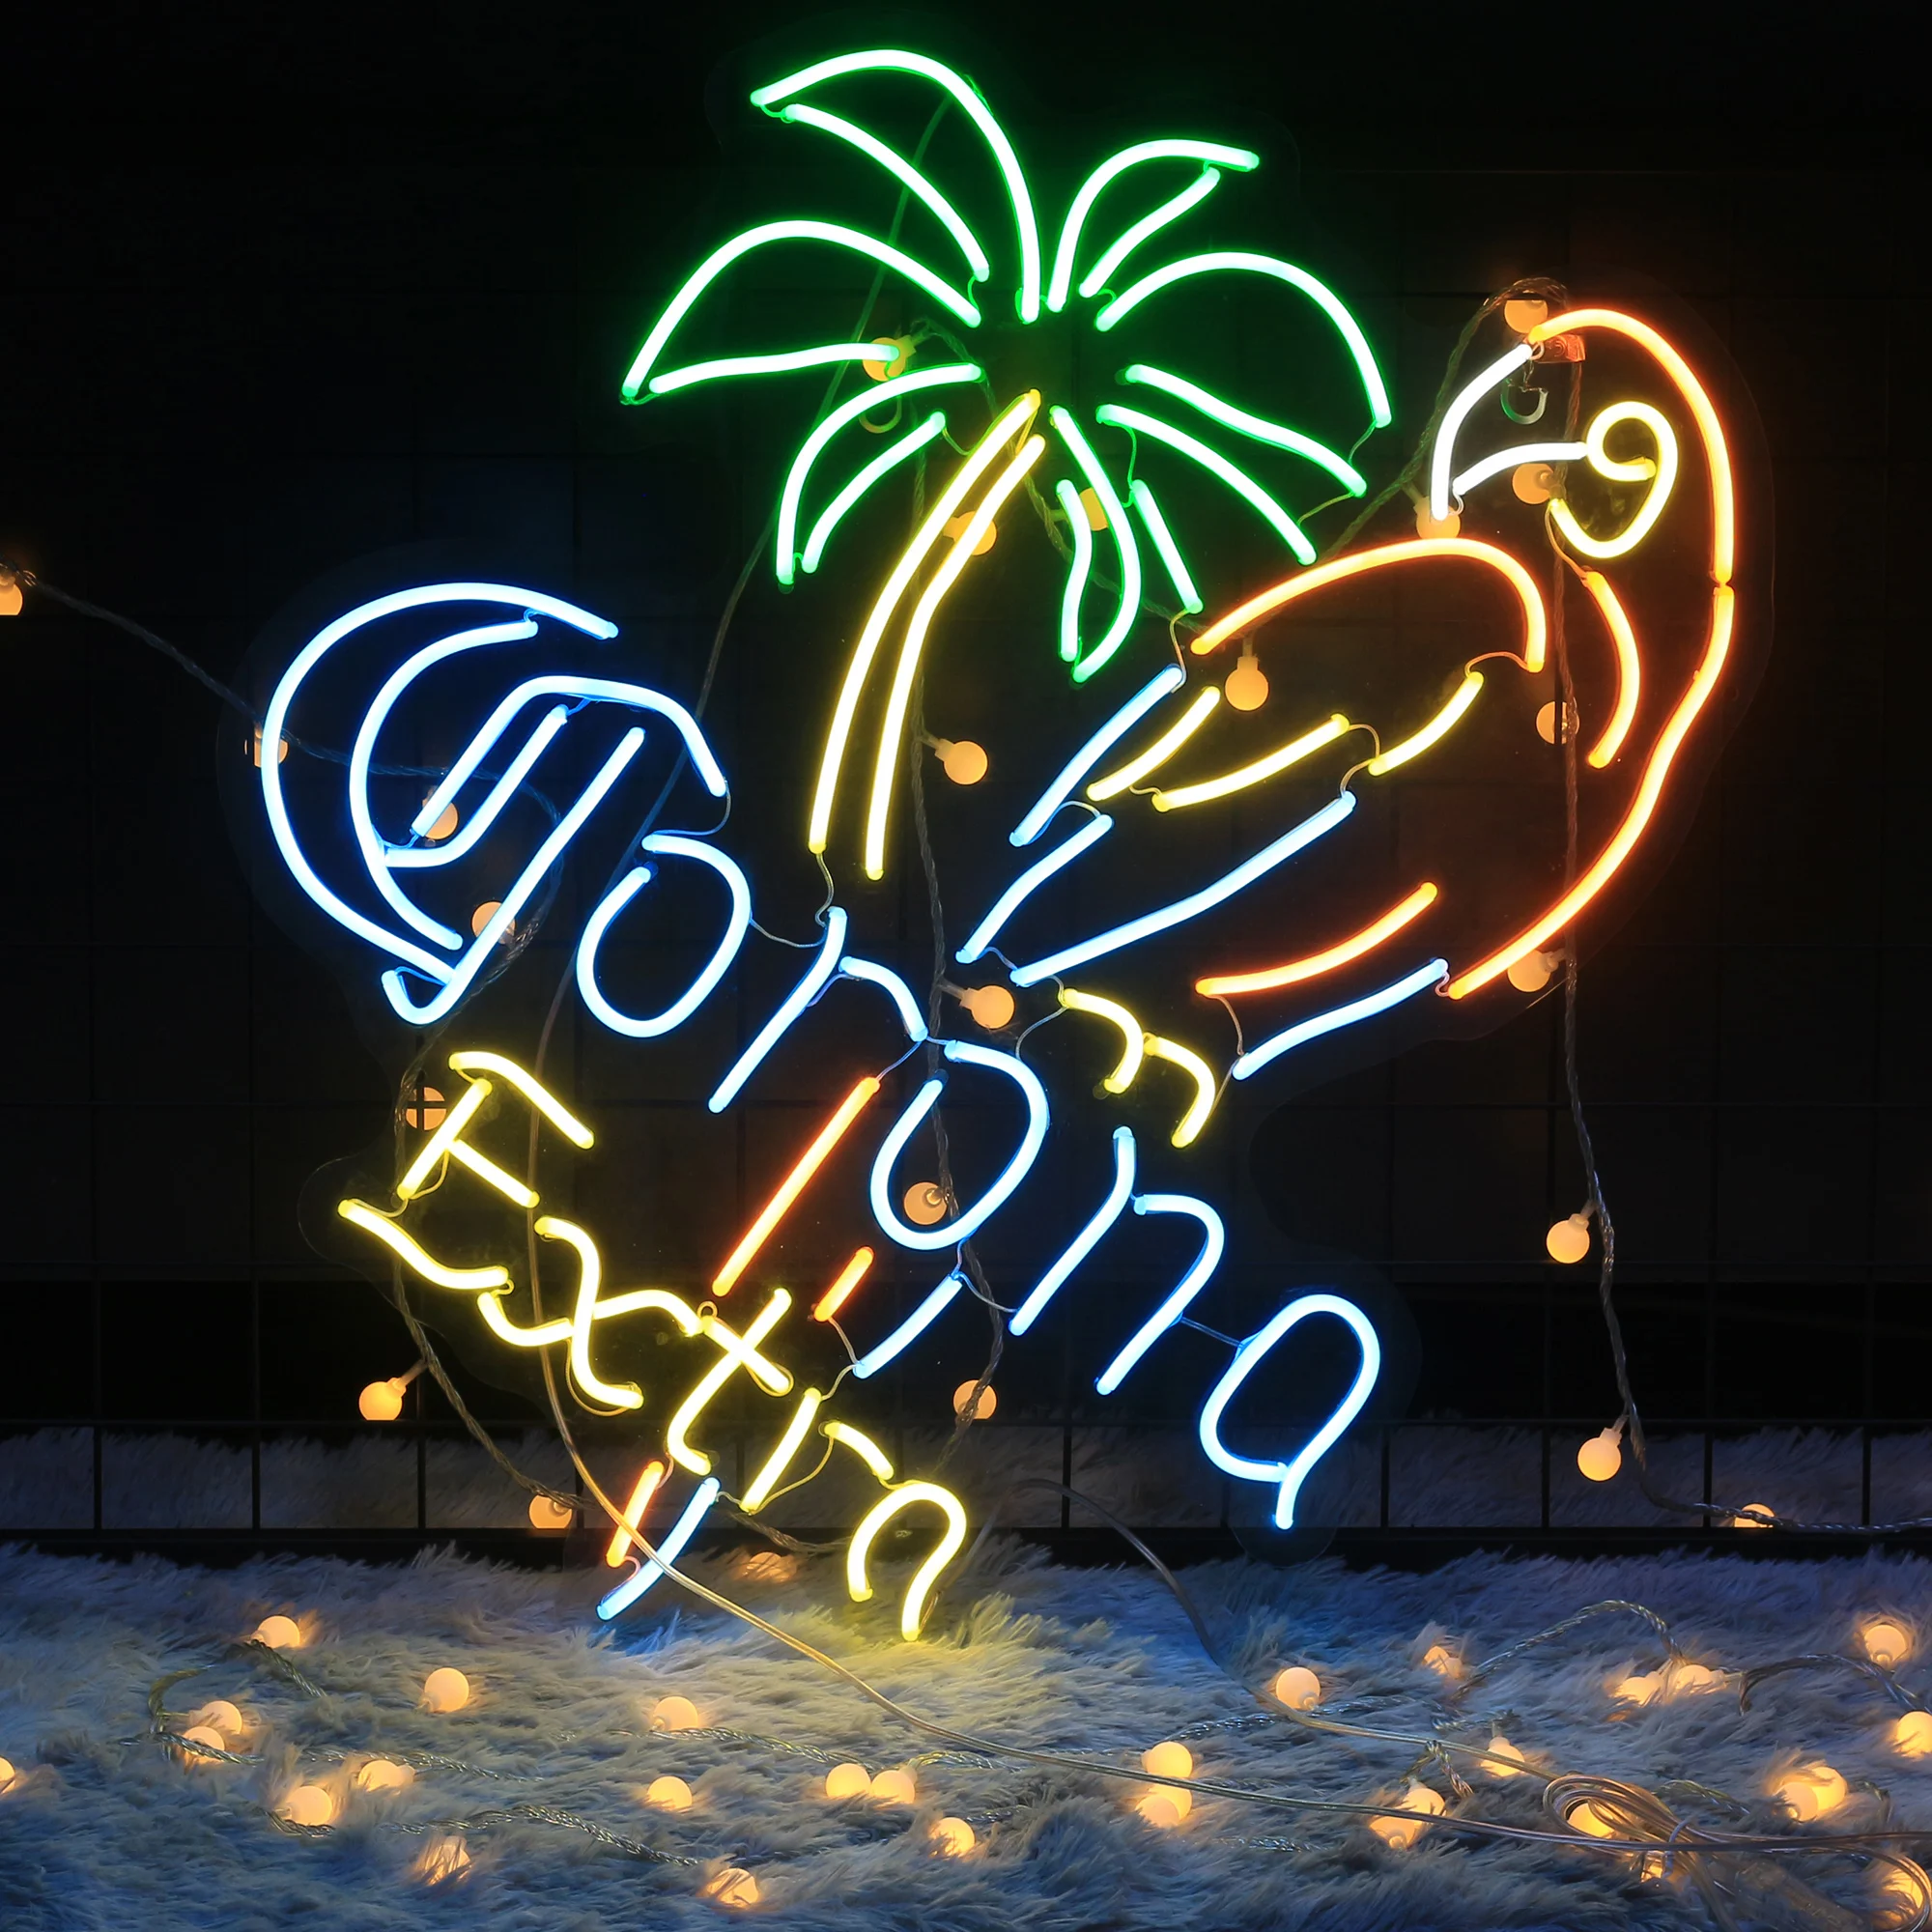 

Custom Bar Sign, Corona Extra Parrot Palm,Personalized birthday gif Neon Sign Beer Pub Club Decor,Led Neon Light Cafe Party Home